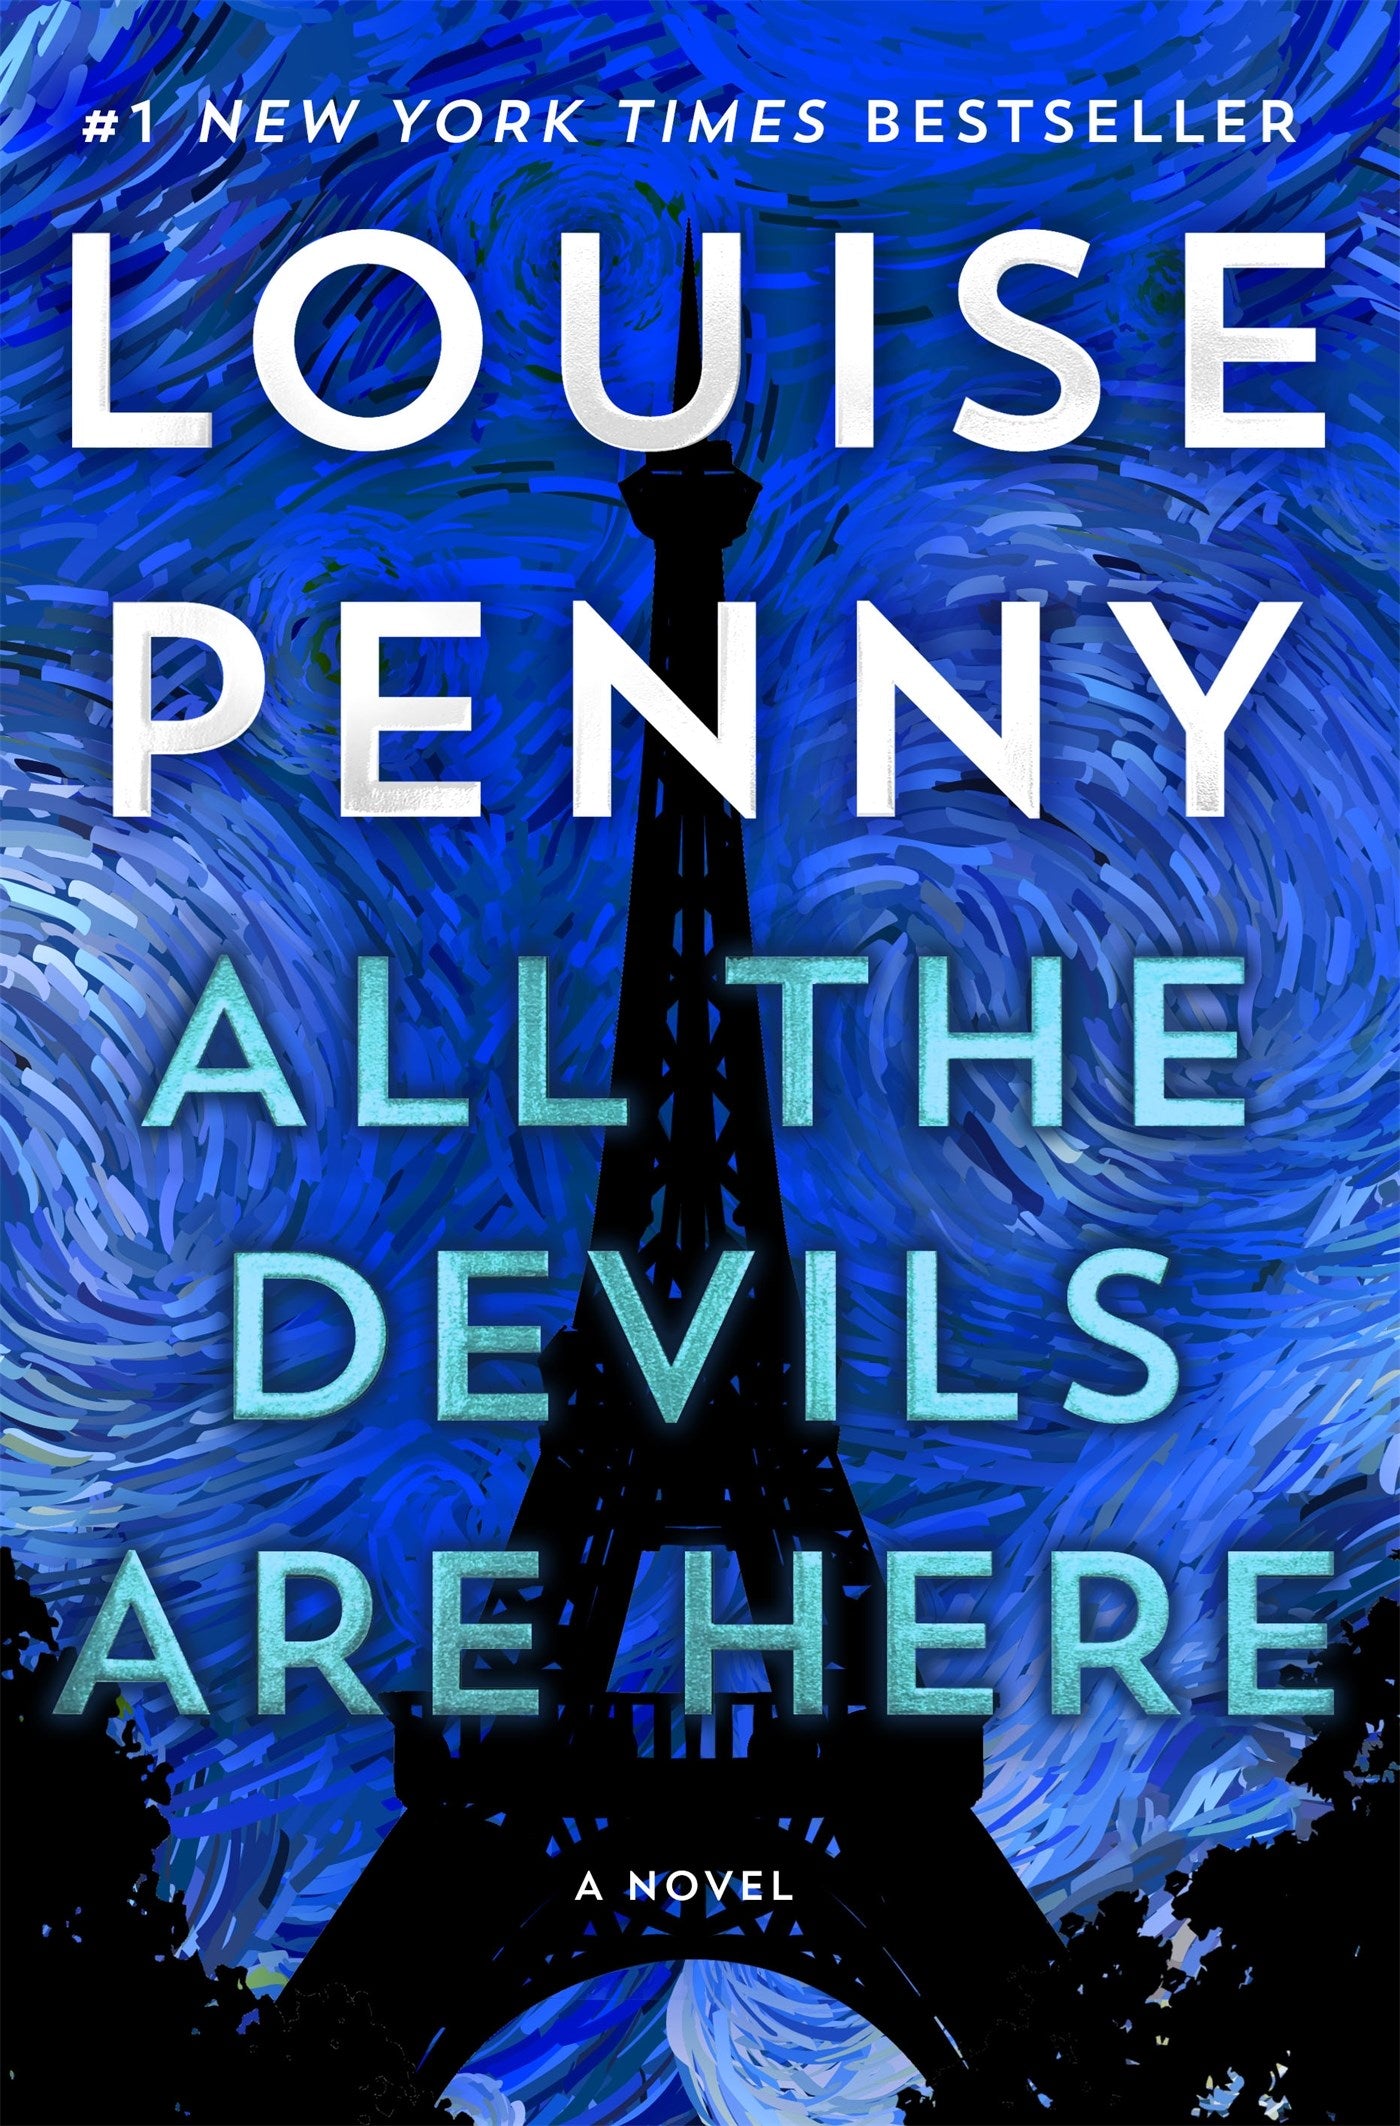 All the Devils Are Here: A Novel